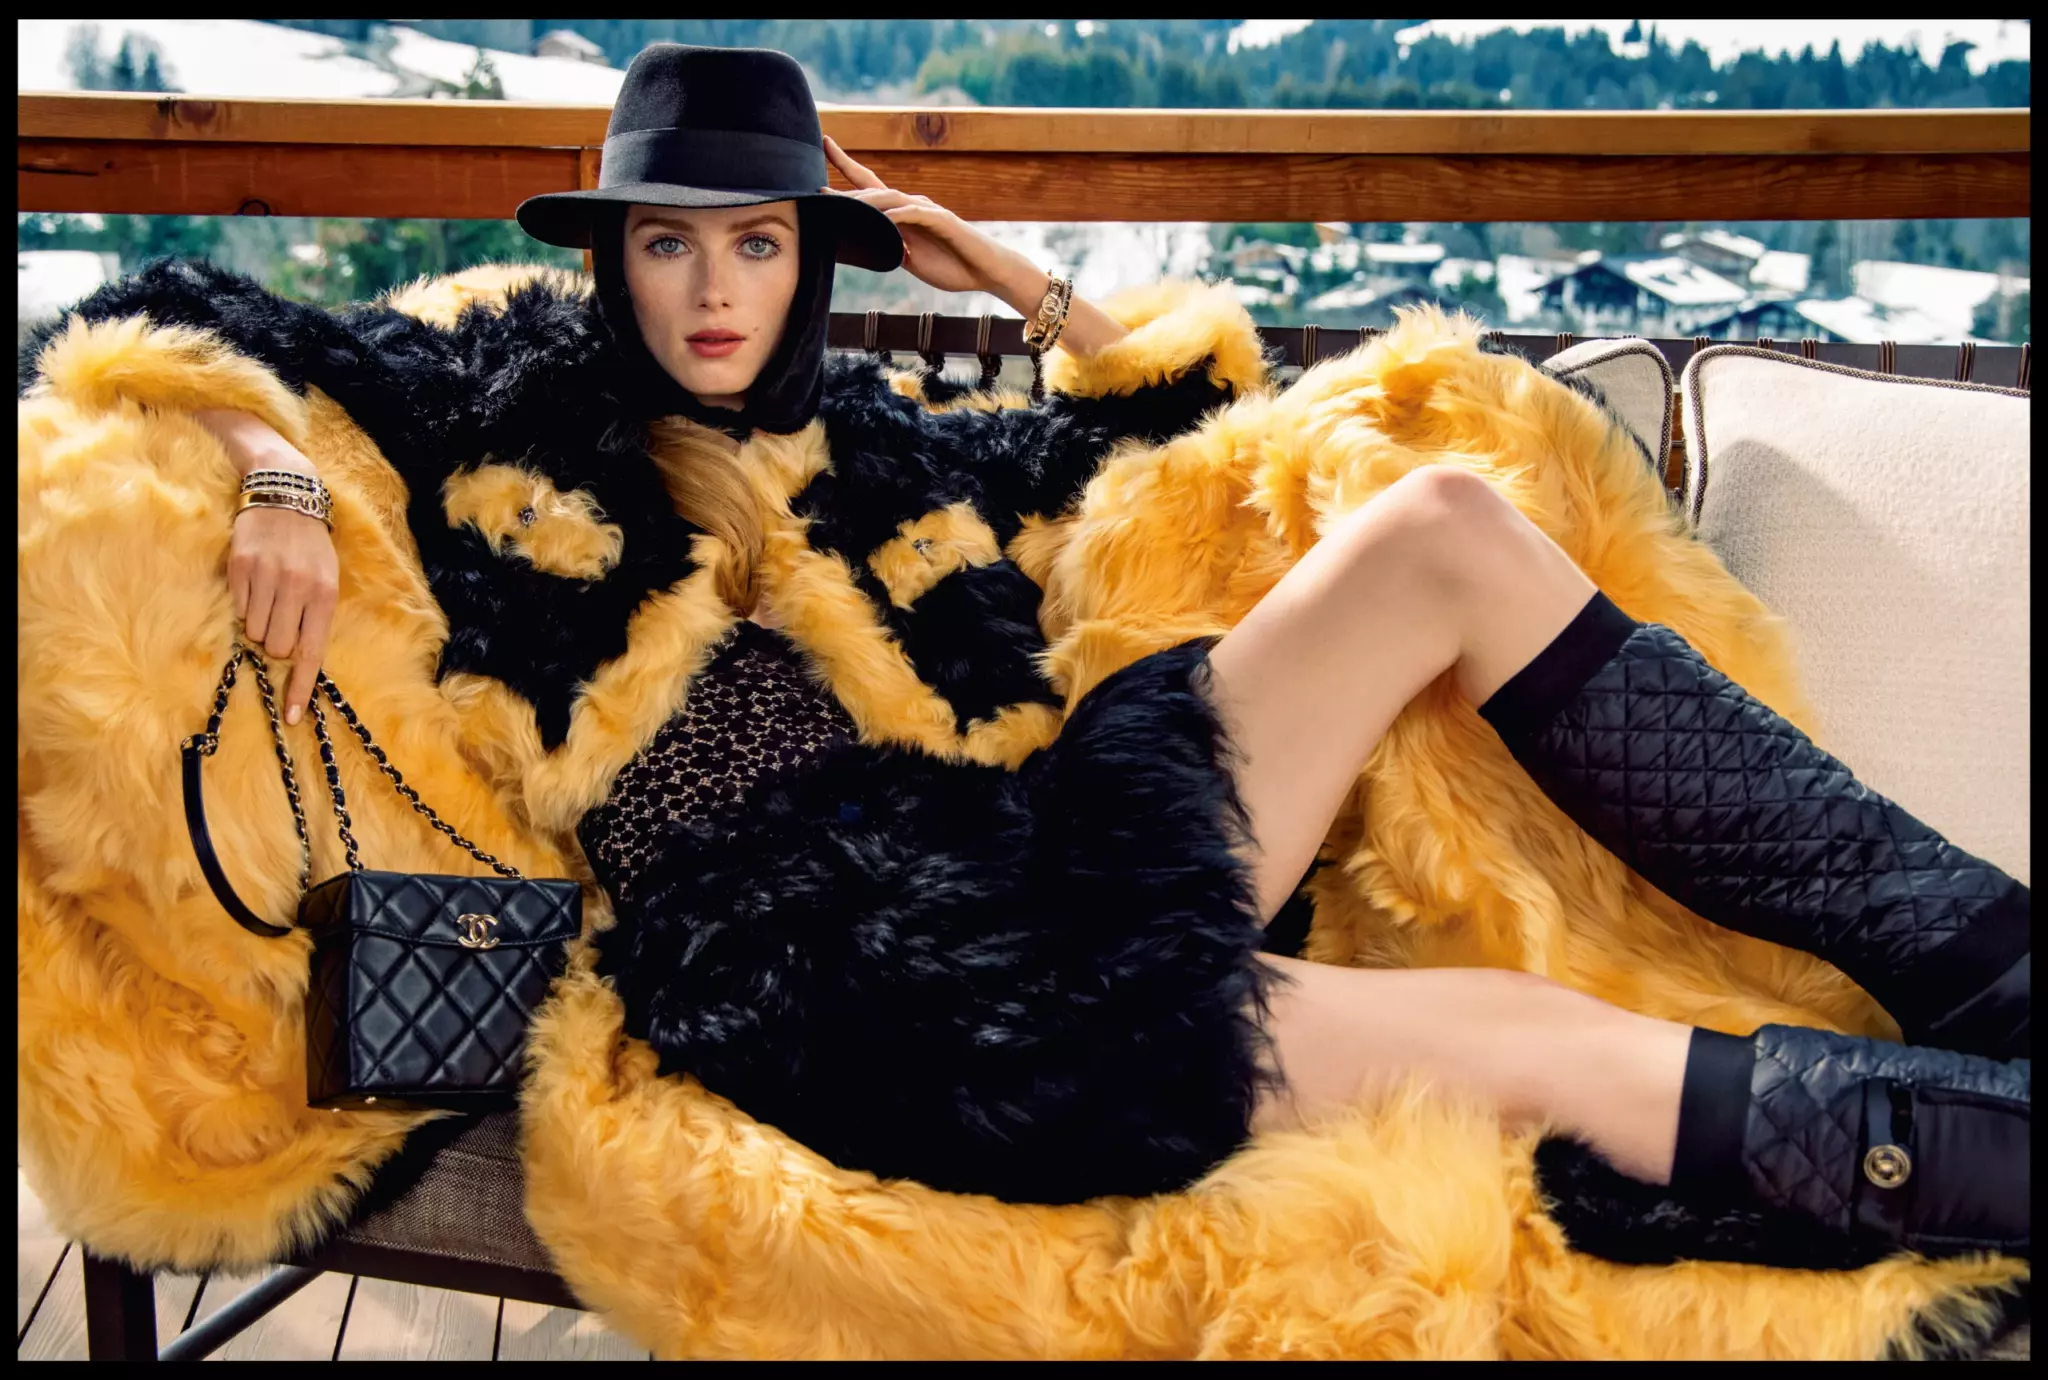 Fall-Winter 21/22 trends that fashionistas will adopt this season. Focus on iconic Chanel, Baum und Pferdgarten, By Malina and By Malene Birger. 2